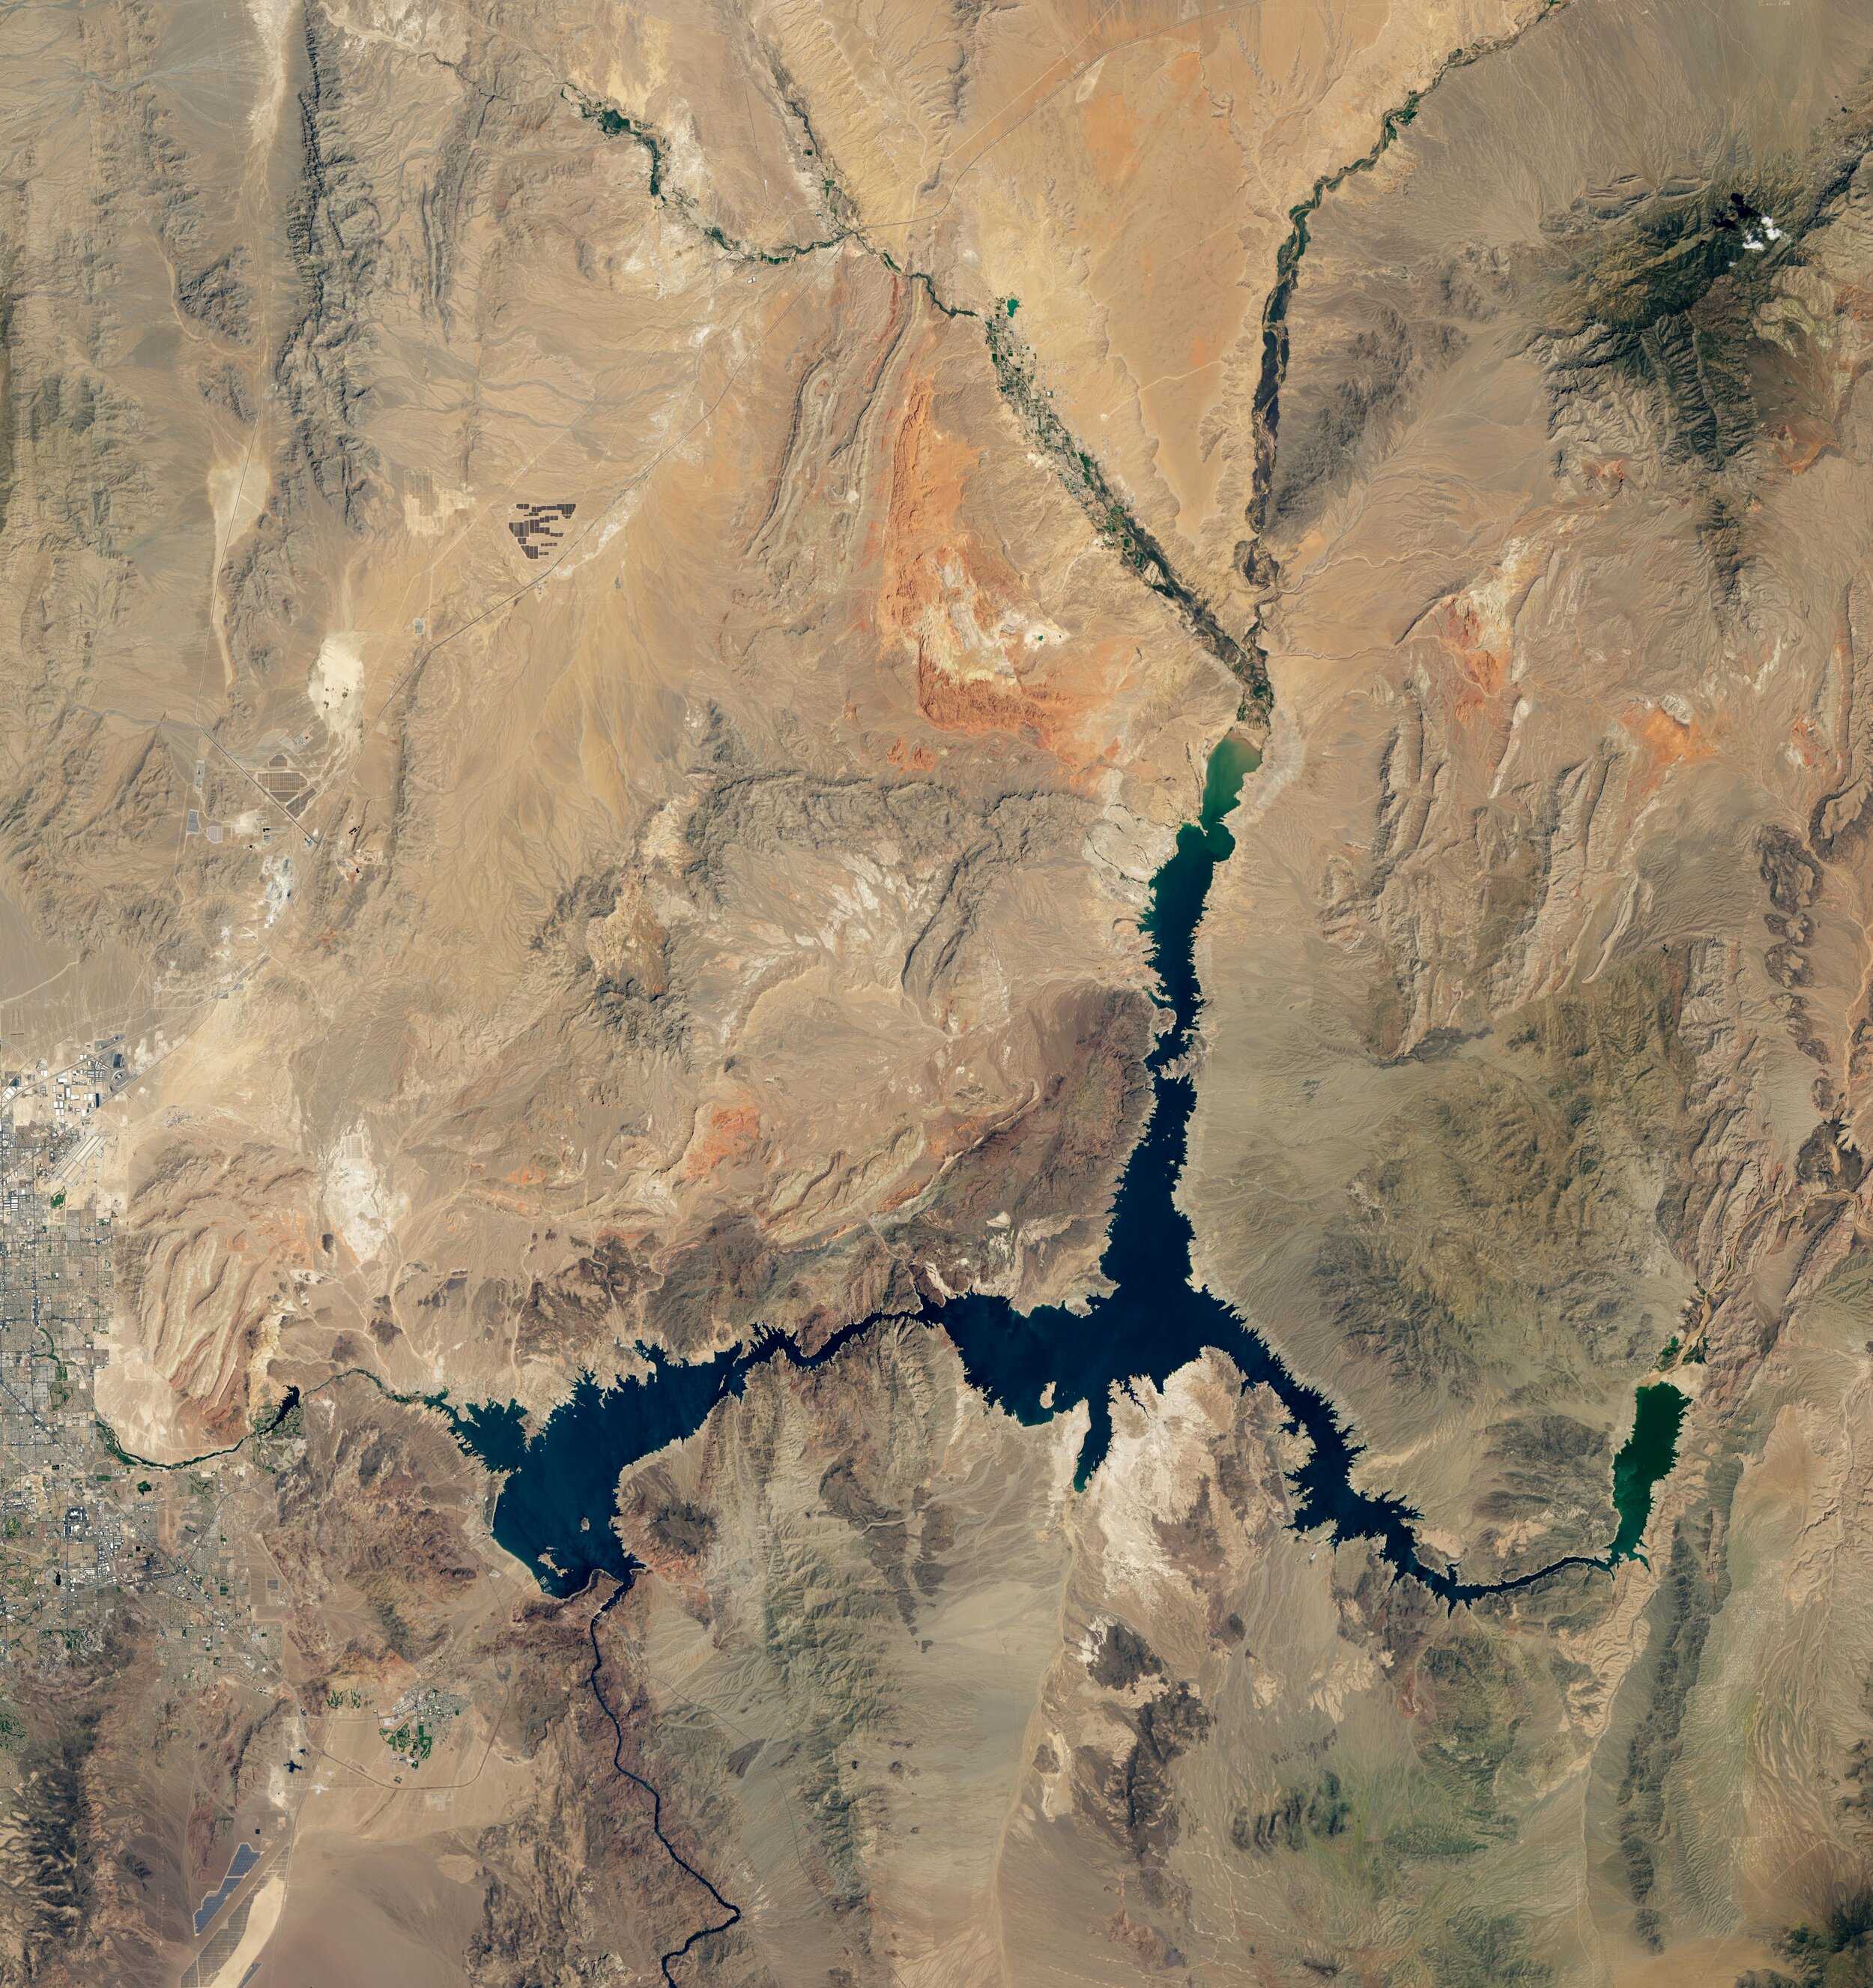 Lake Mead, August 9, 2021 (Copy)